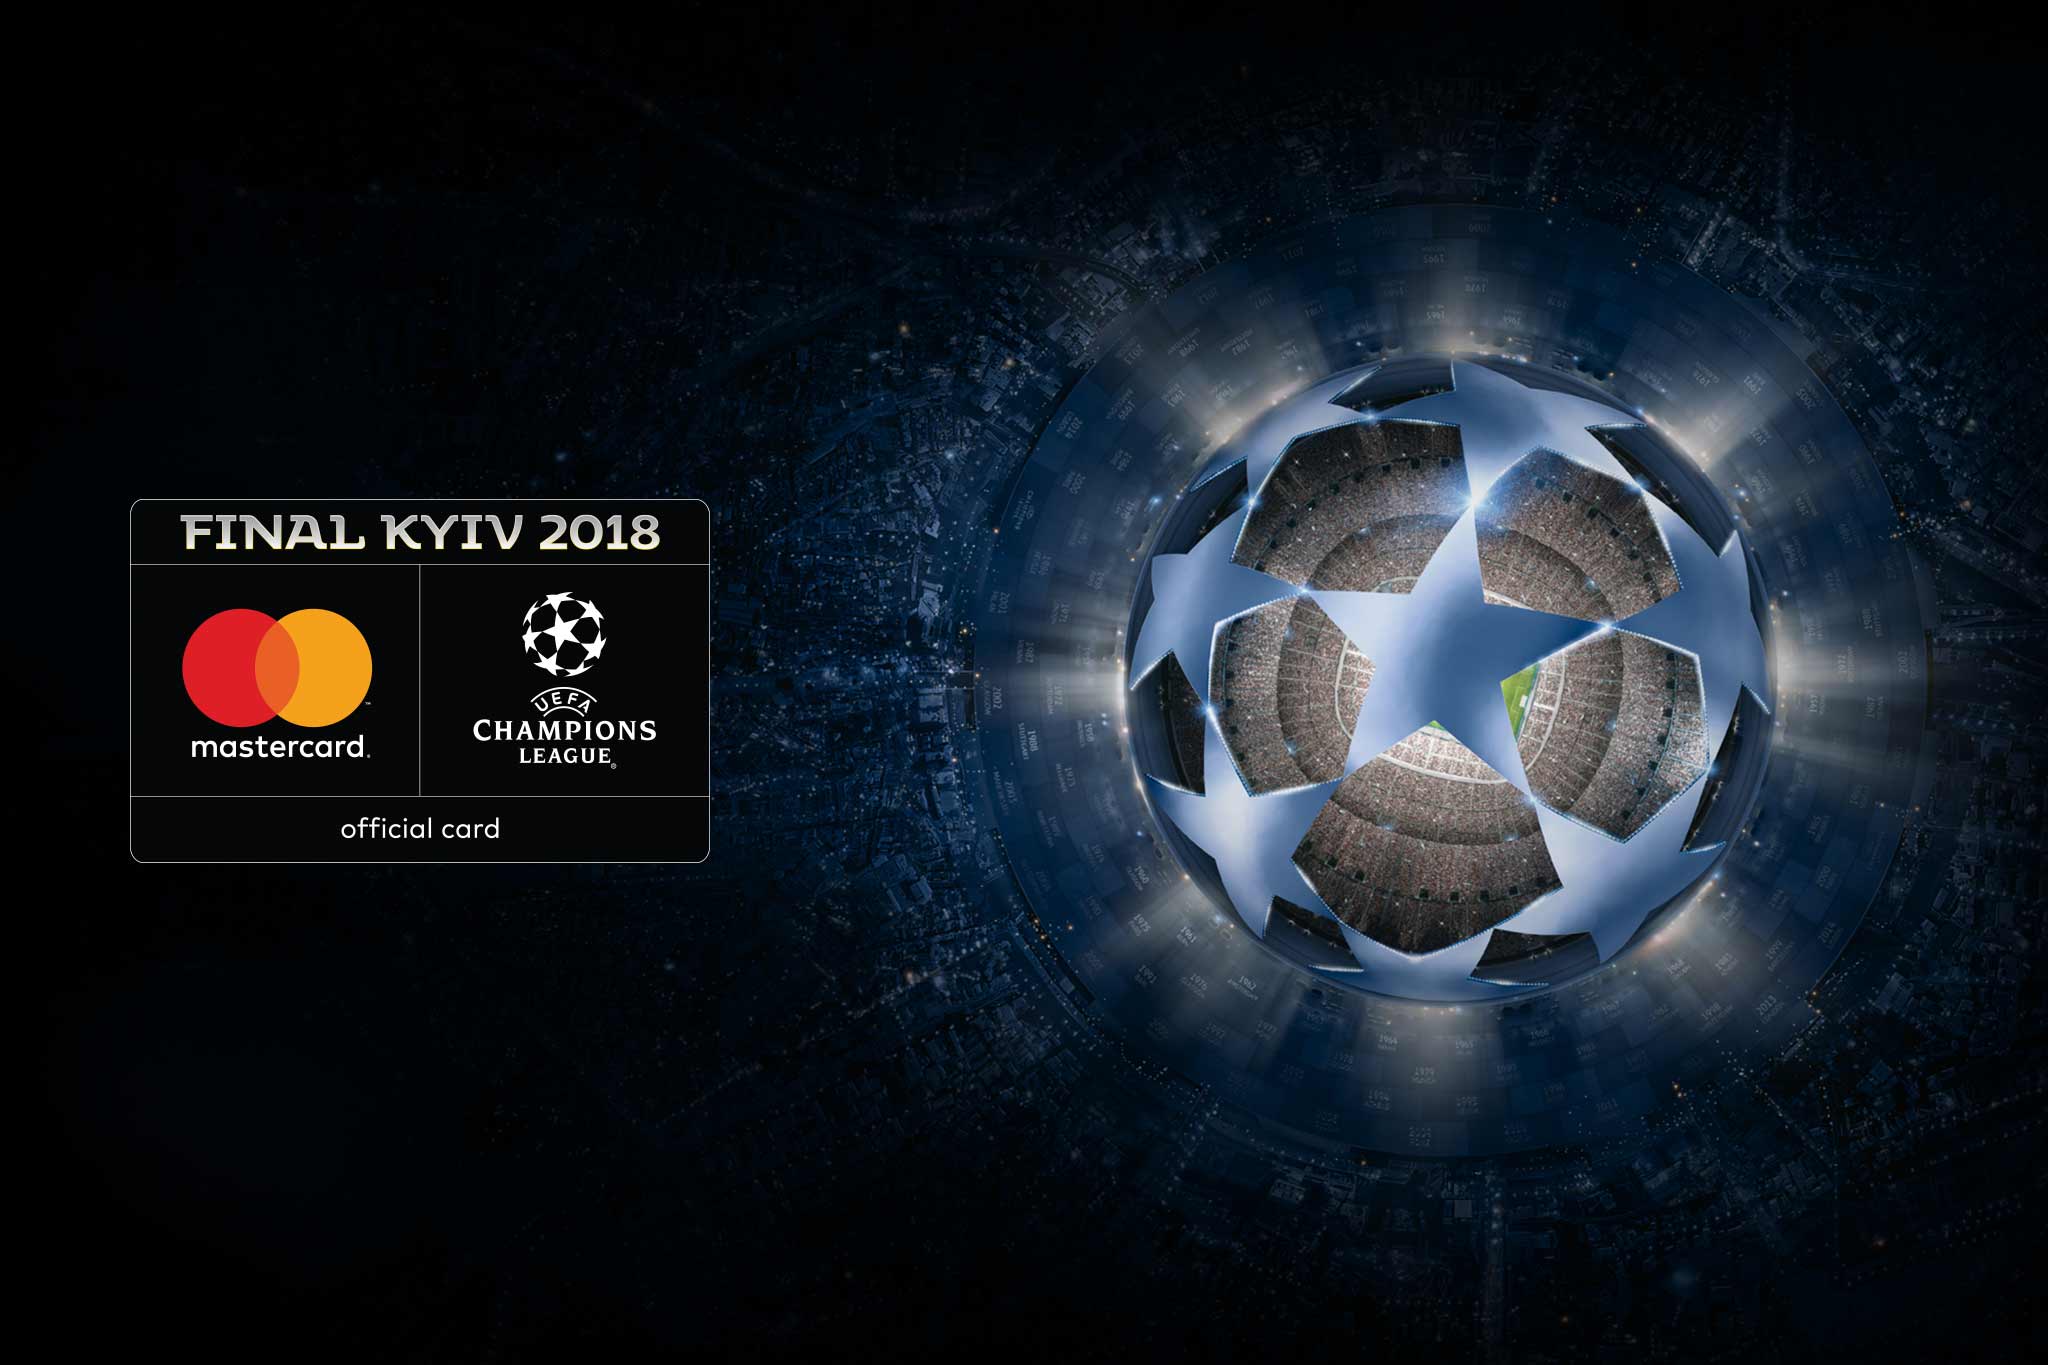 win tickets to the champions league final